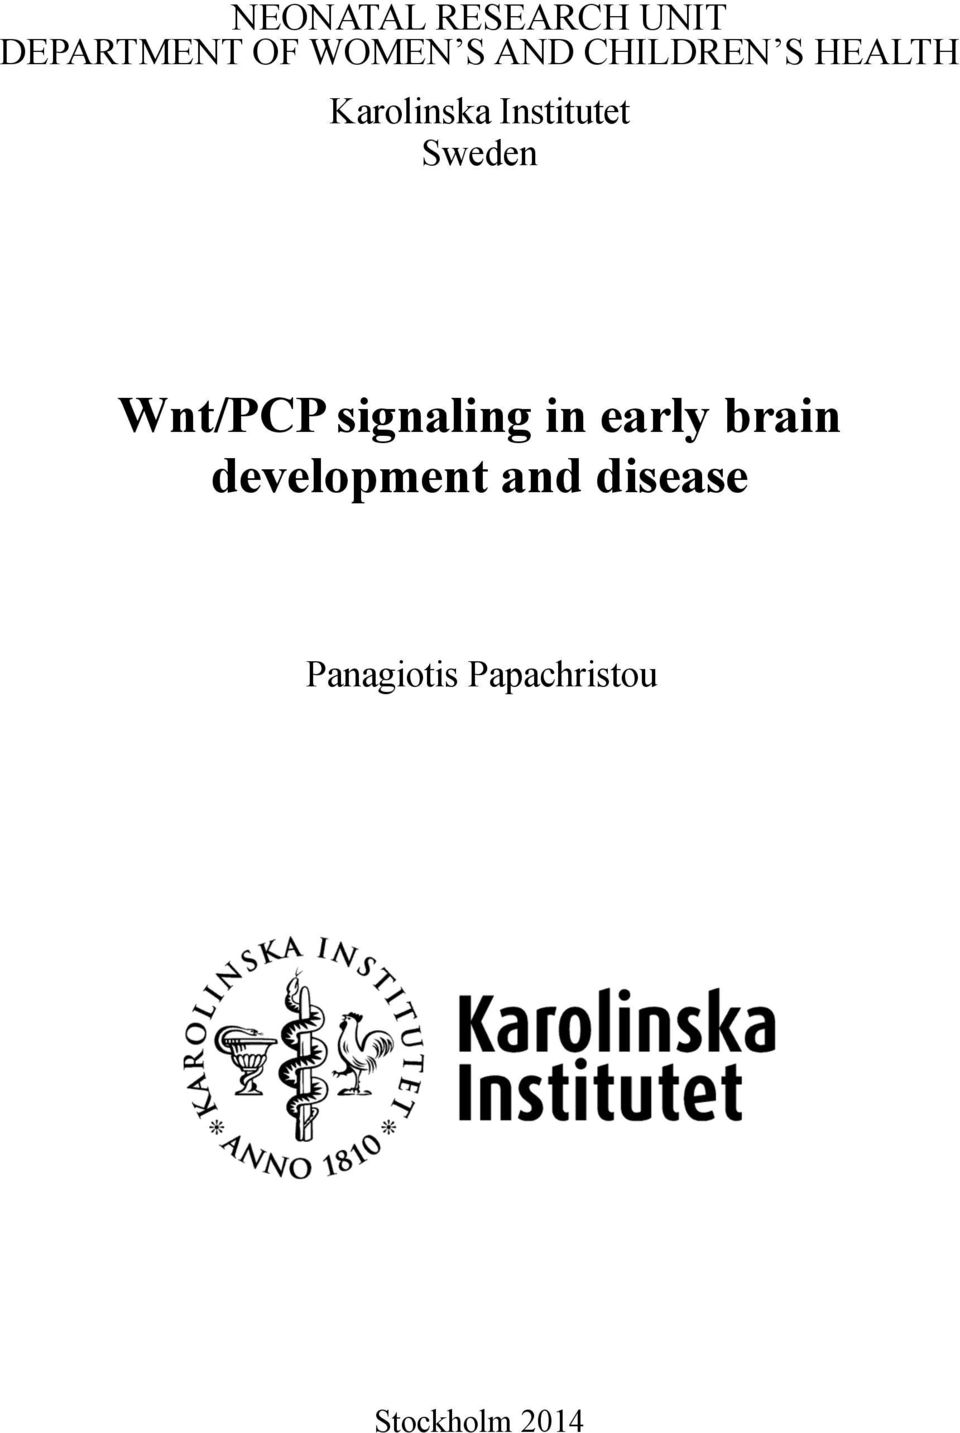 Sweden Wnt/PCP signaling in early brain